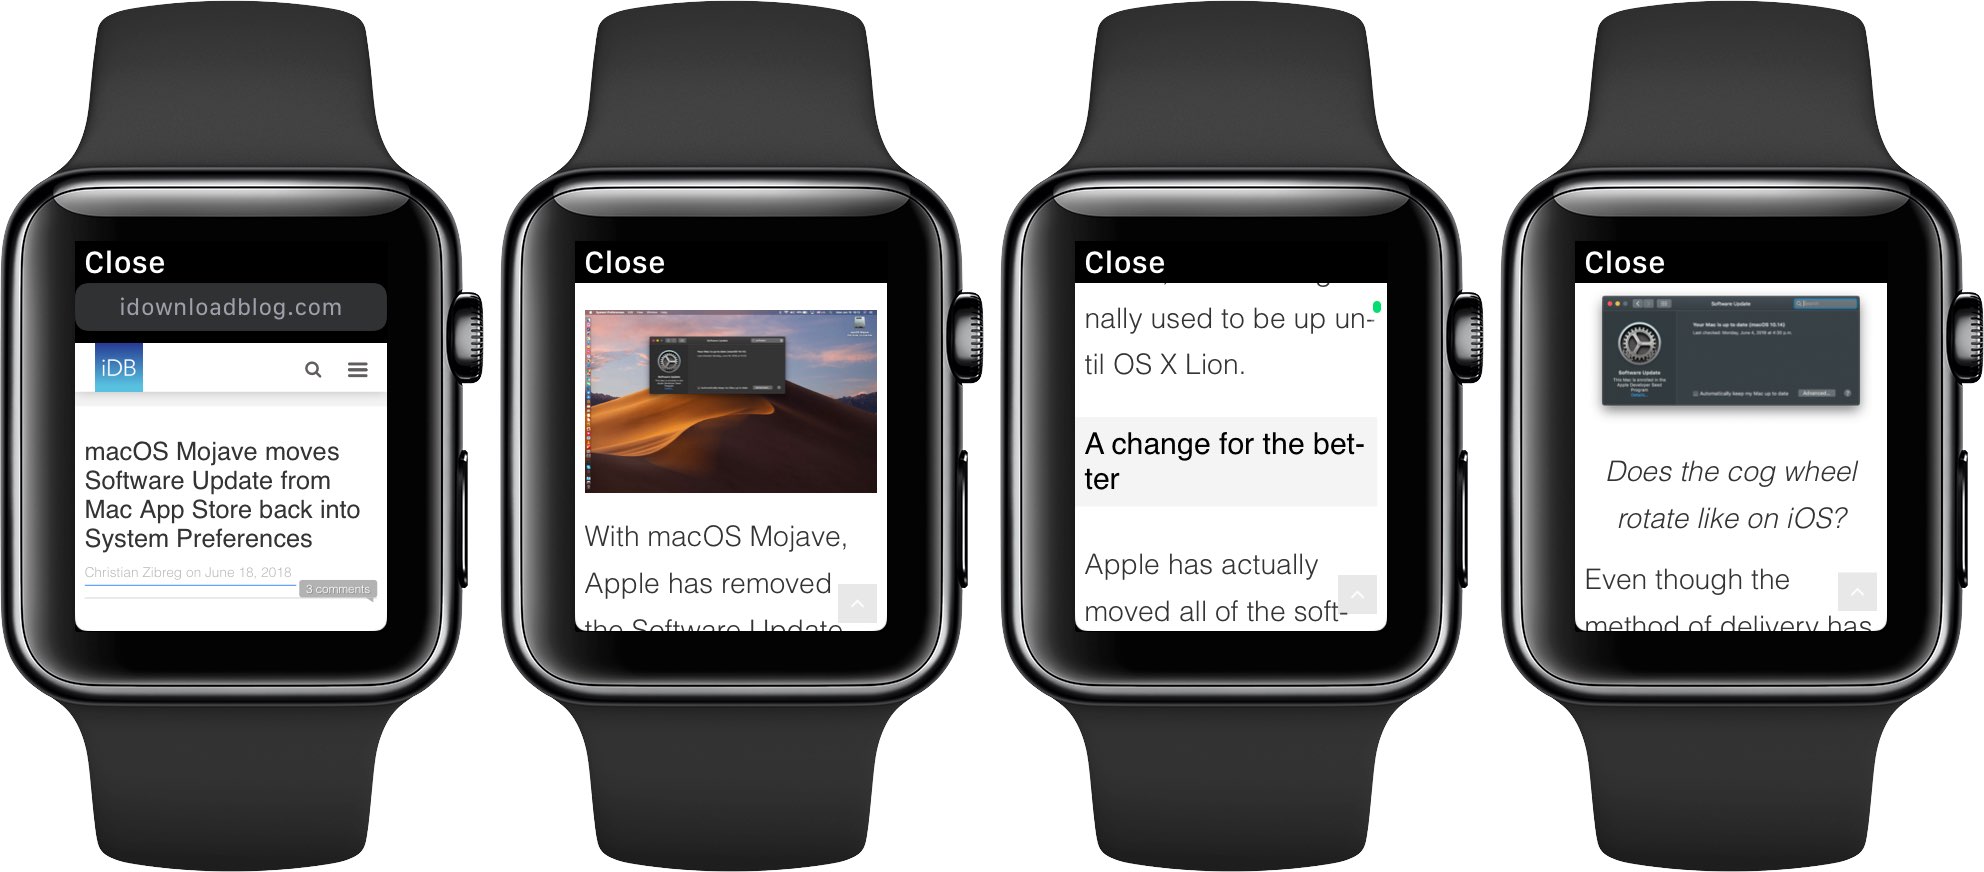 watchOS 5's WebKit engine renders the text and images, but not videos